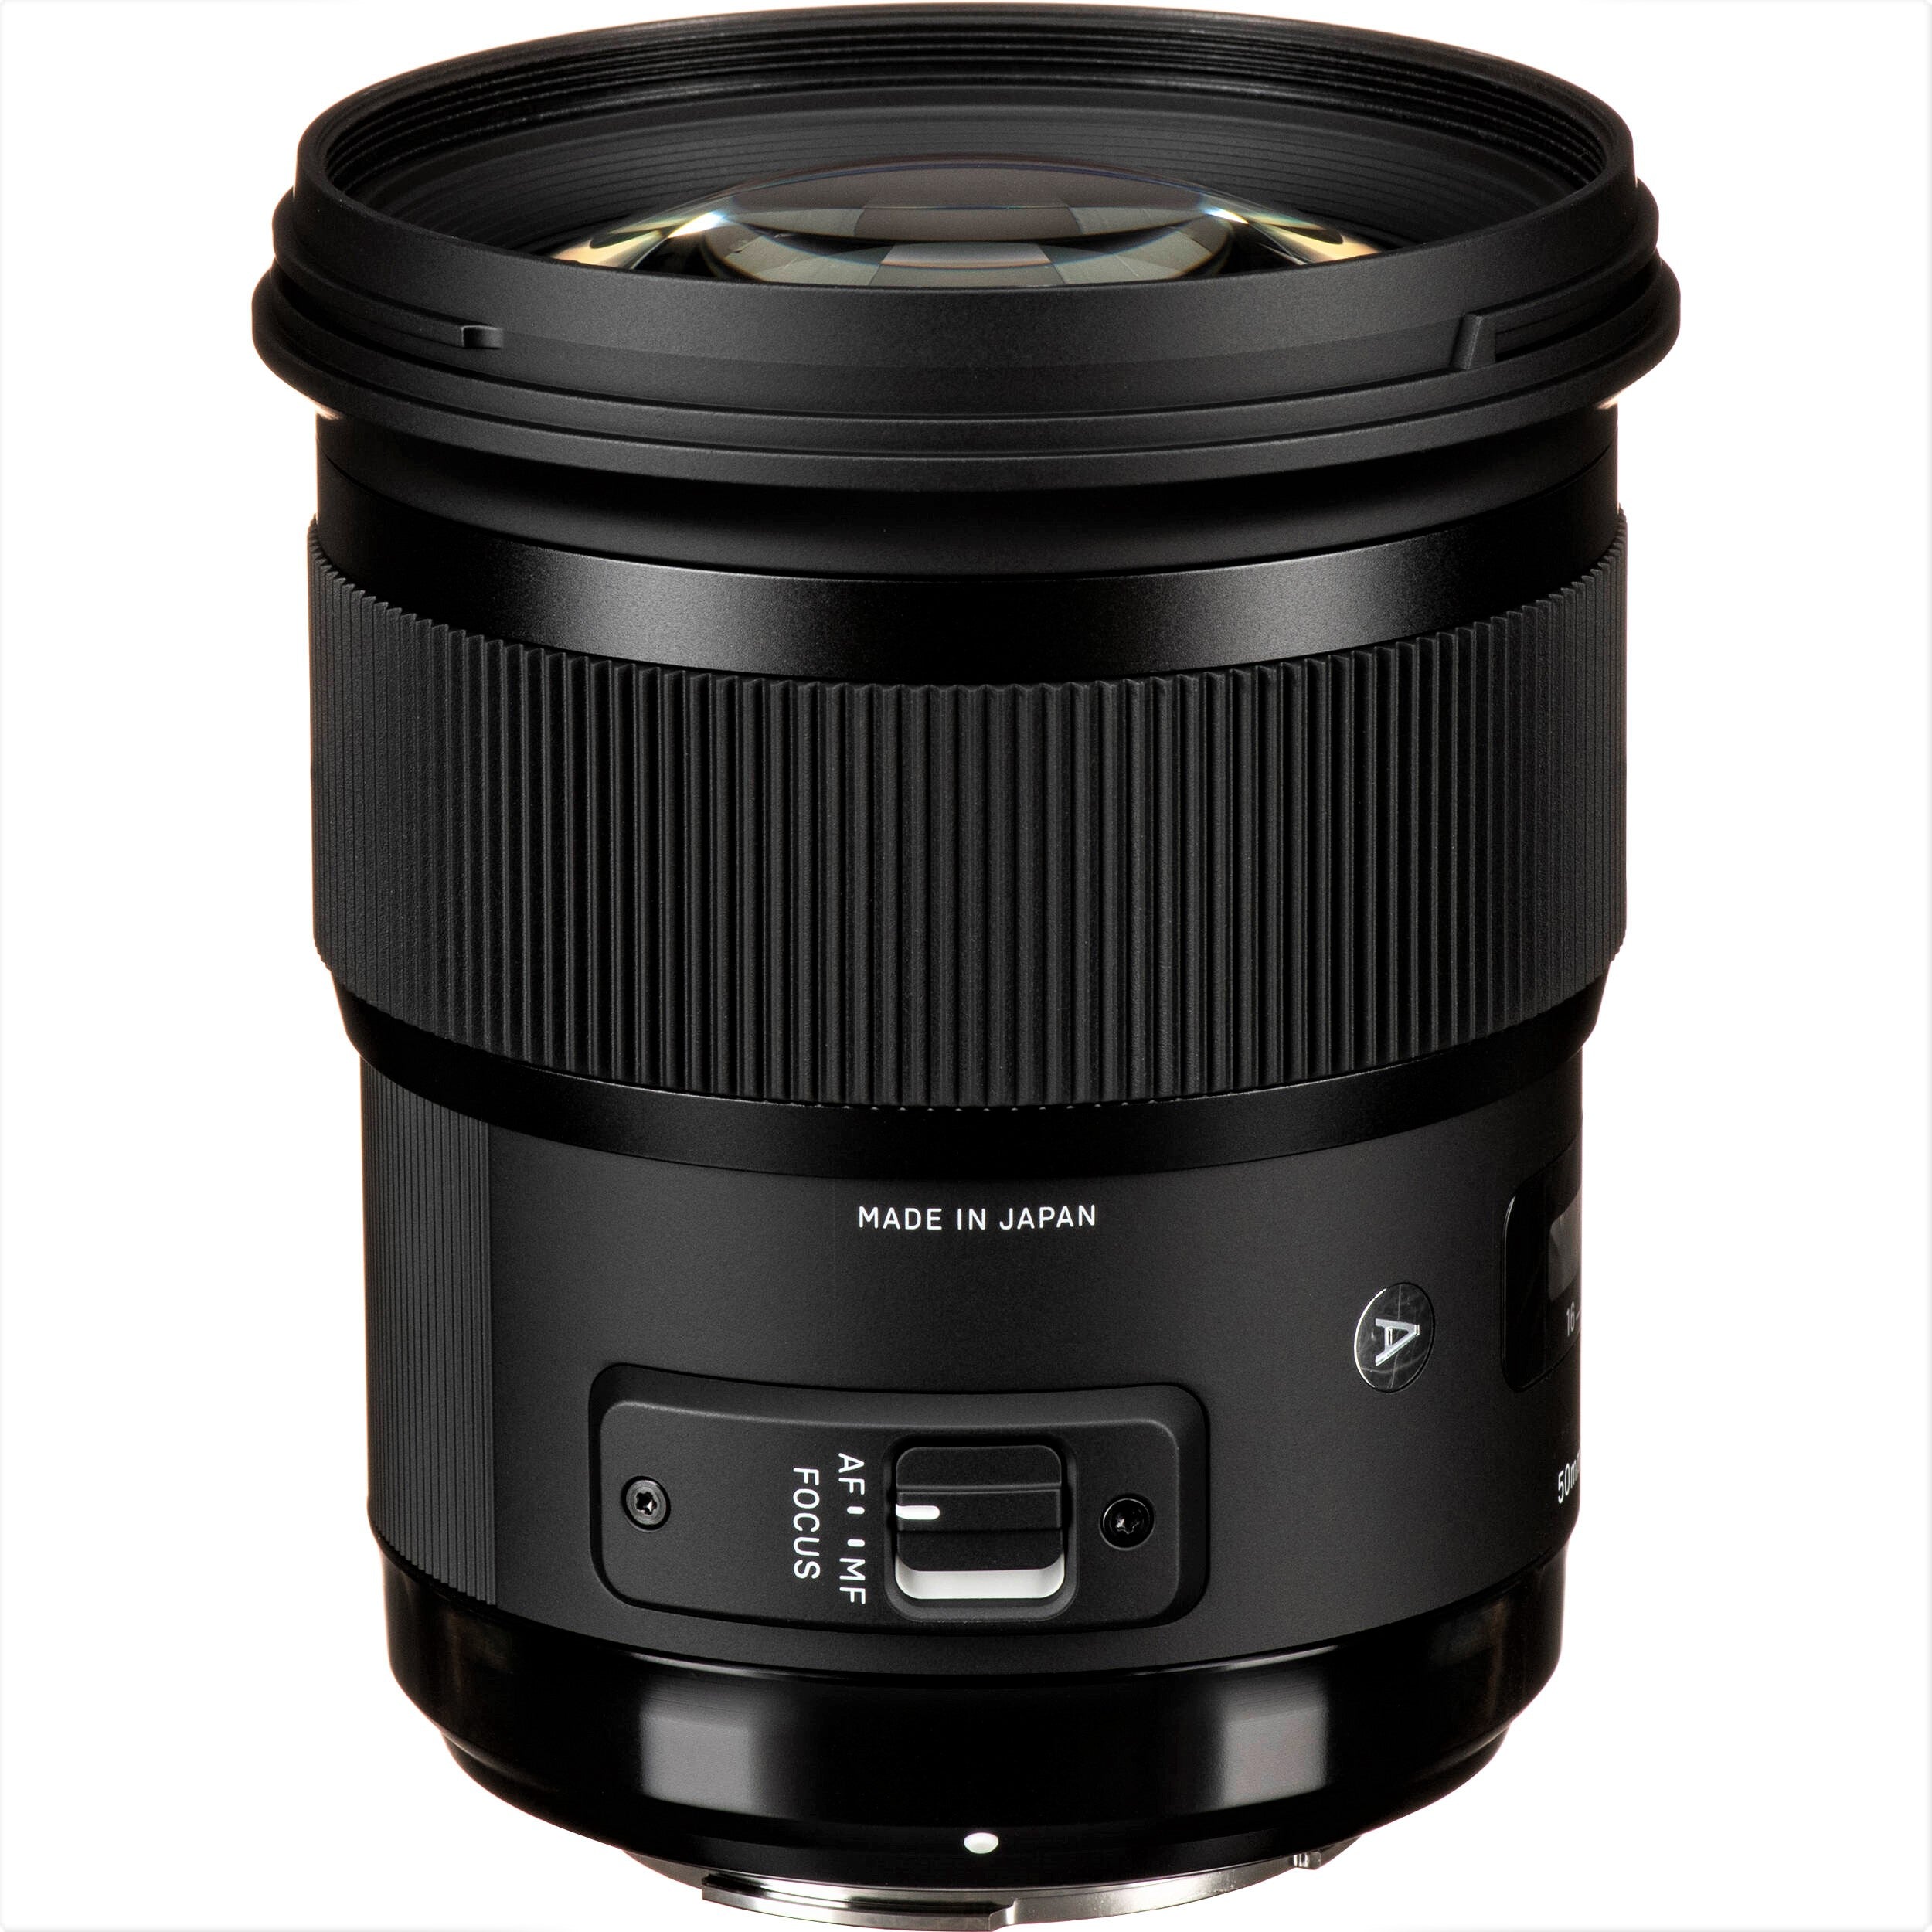 Sigma 50mm F1.4 DG HSM Art Lens for Sony A